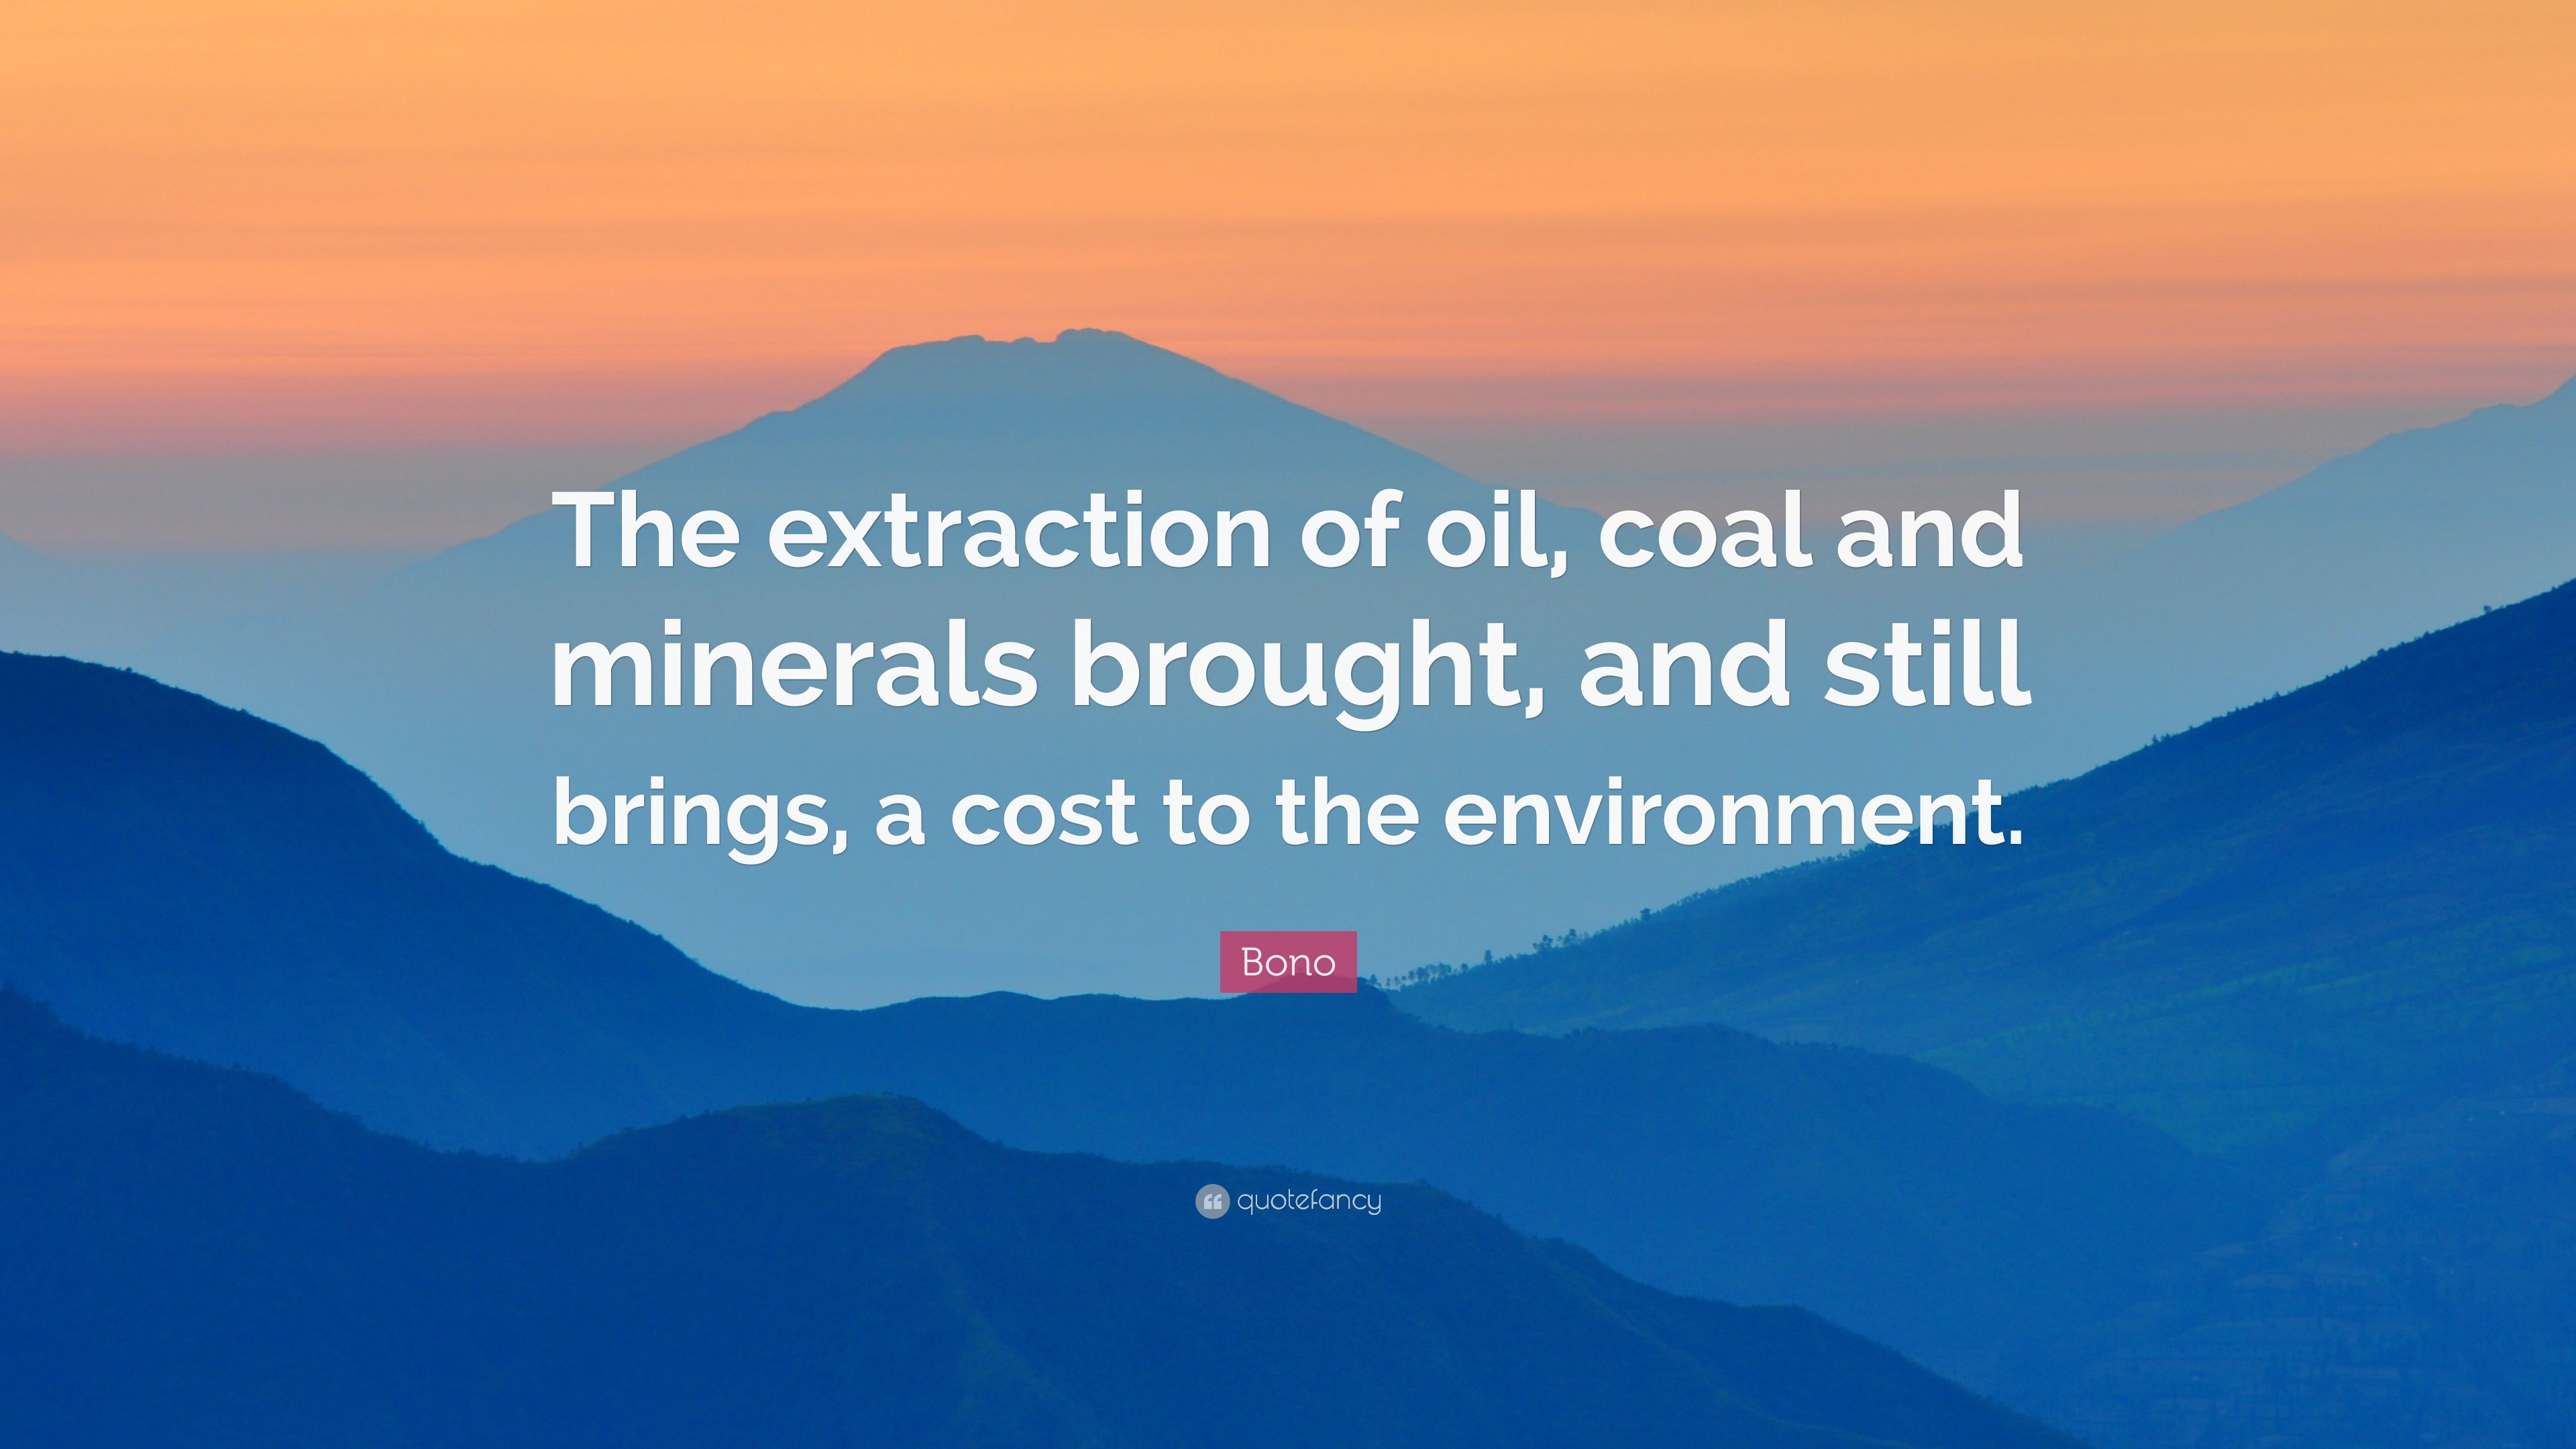 Bono Quote: “The extraction of oil, coal and minerals brought